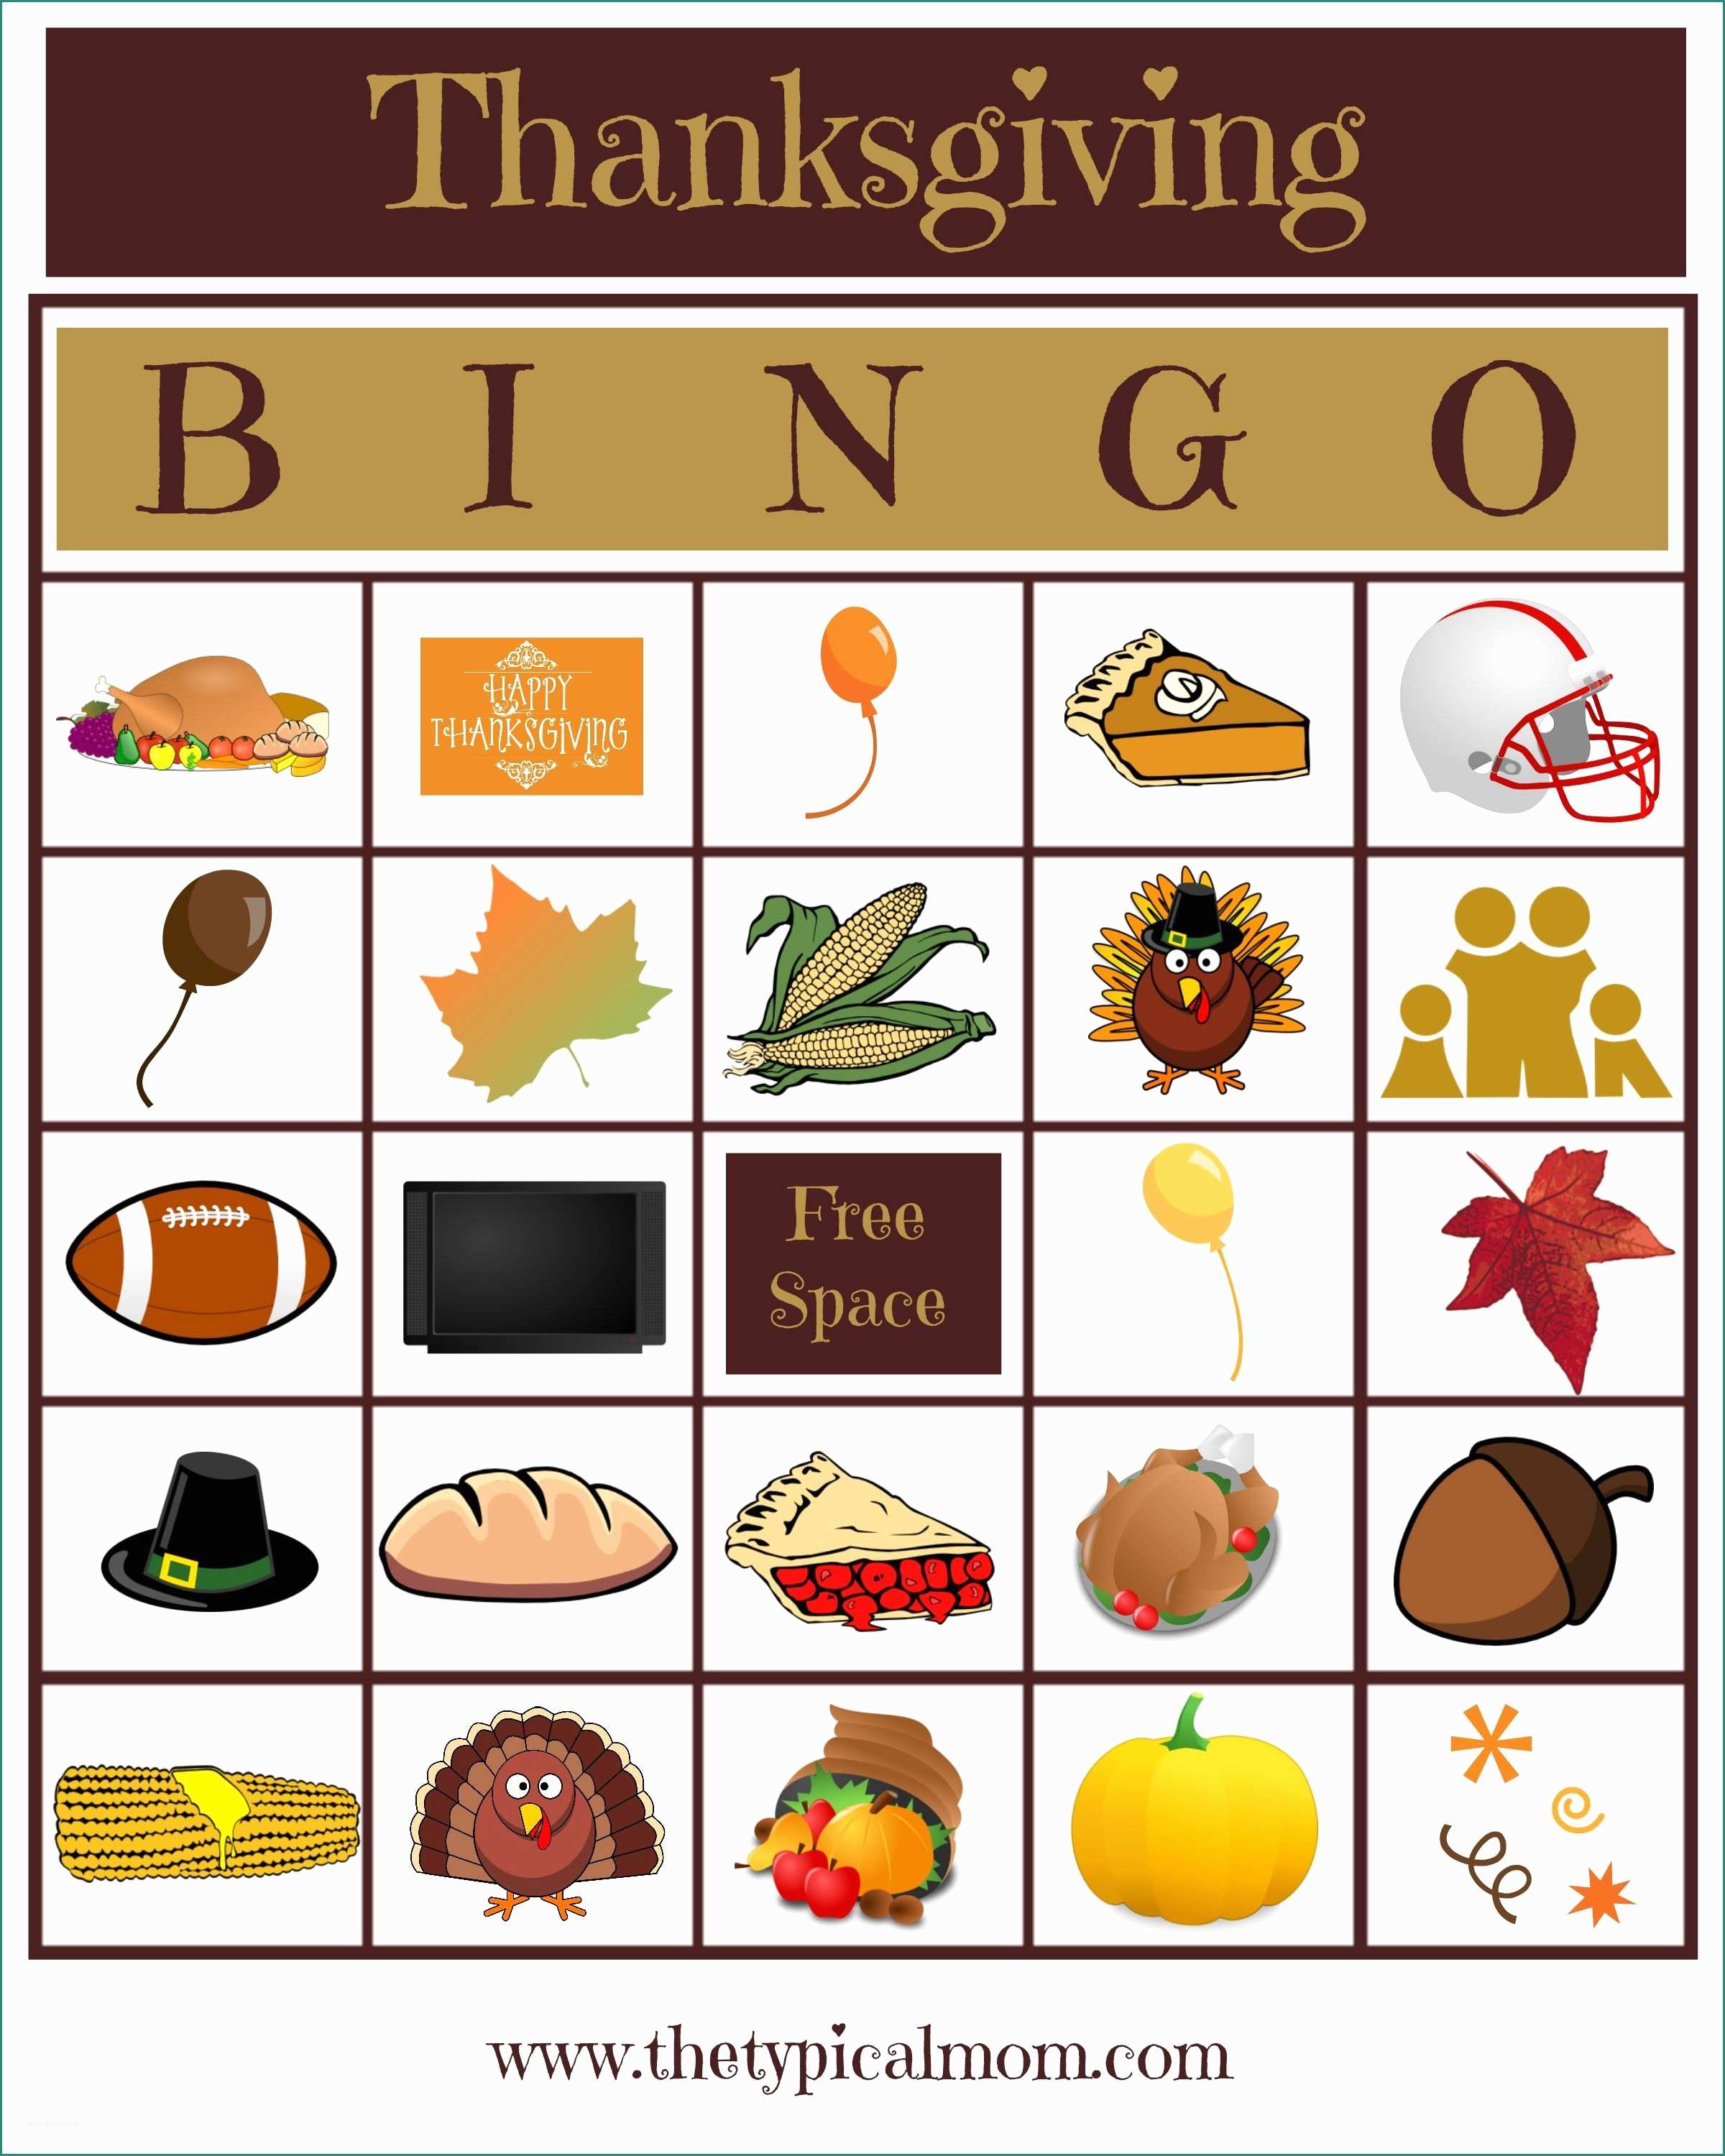 Giochi tombola Gratis E Thanksgiving Bingo Game that Everyone Will Love Great for All Ages